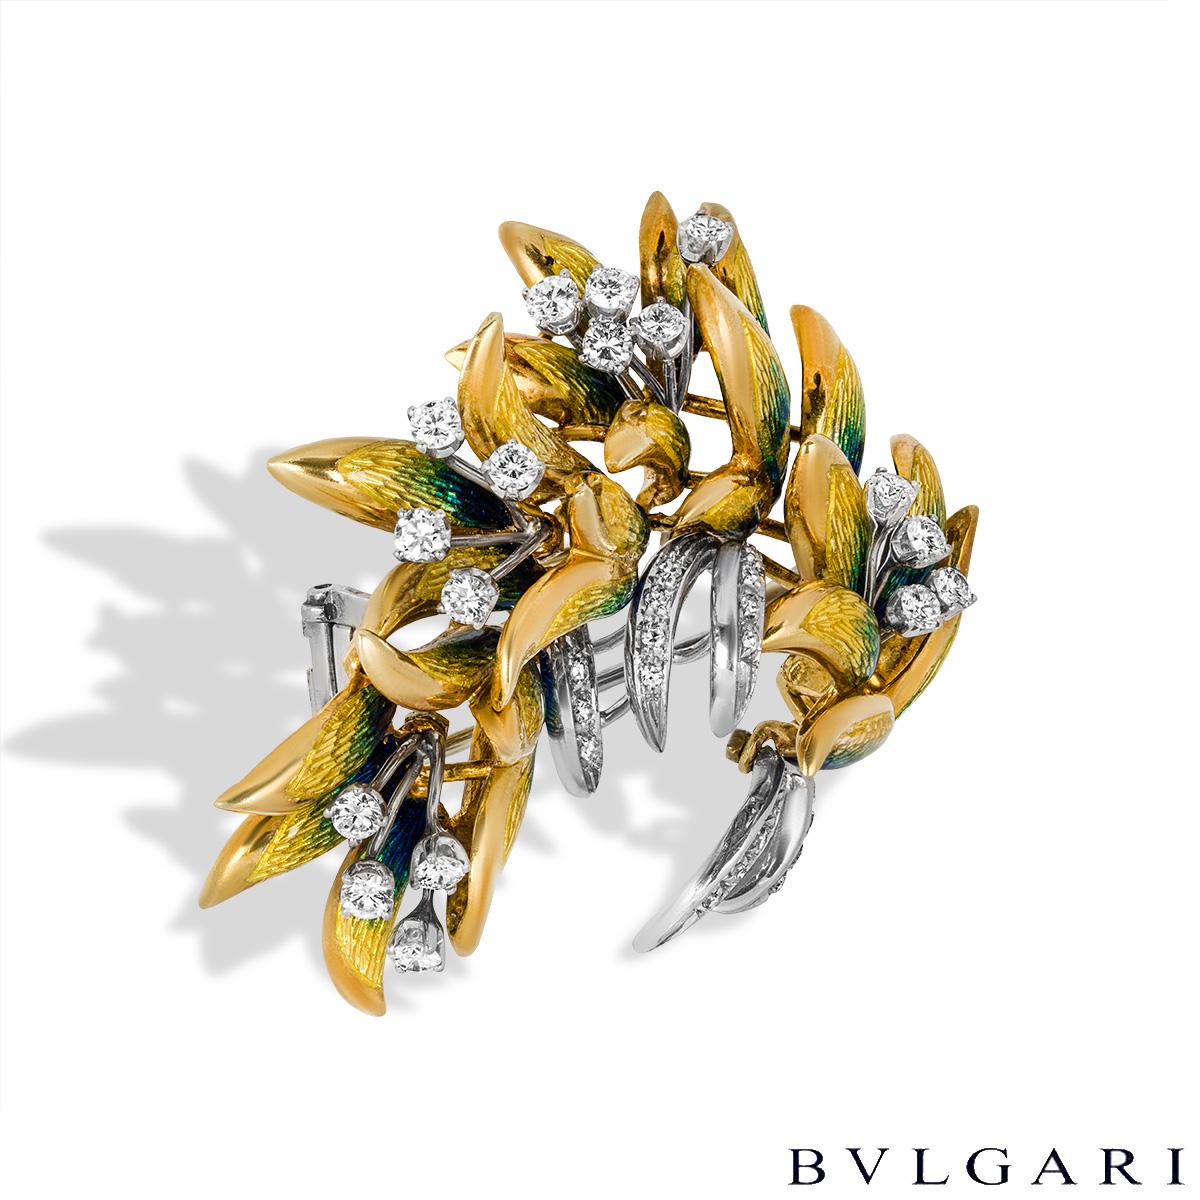 A unique bi-colour gold enamel and diamond brooch by Bvlgari. The brooch features four yellow gold floral motifs adorned with a blue to yellow ombre enamel. Set to the centre of the flowers are 17 round brilliant cut diamonds with an approximate